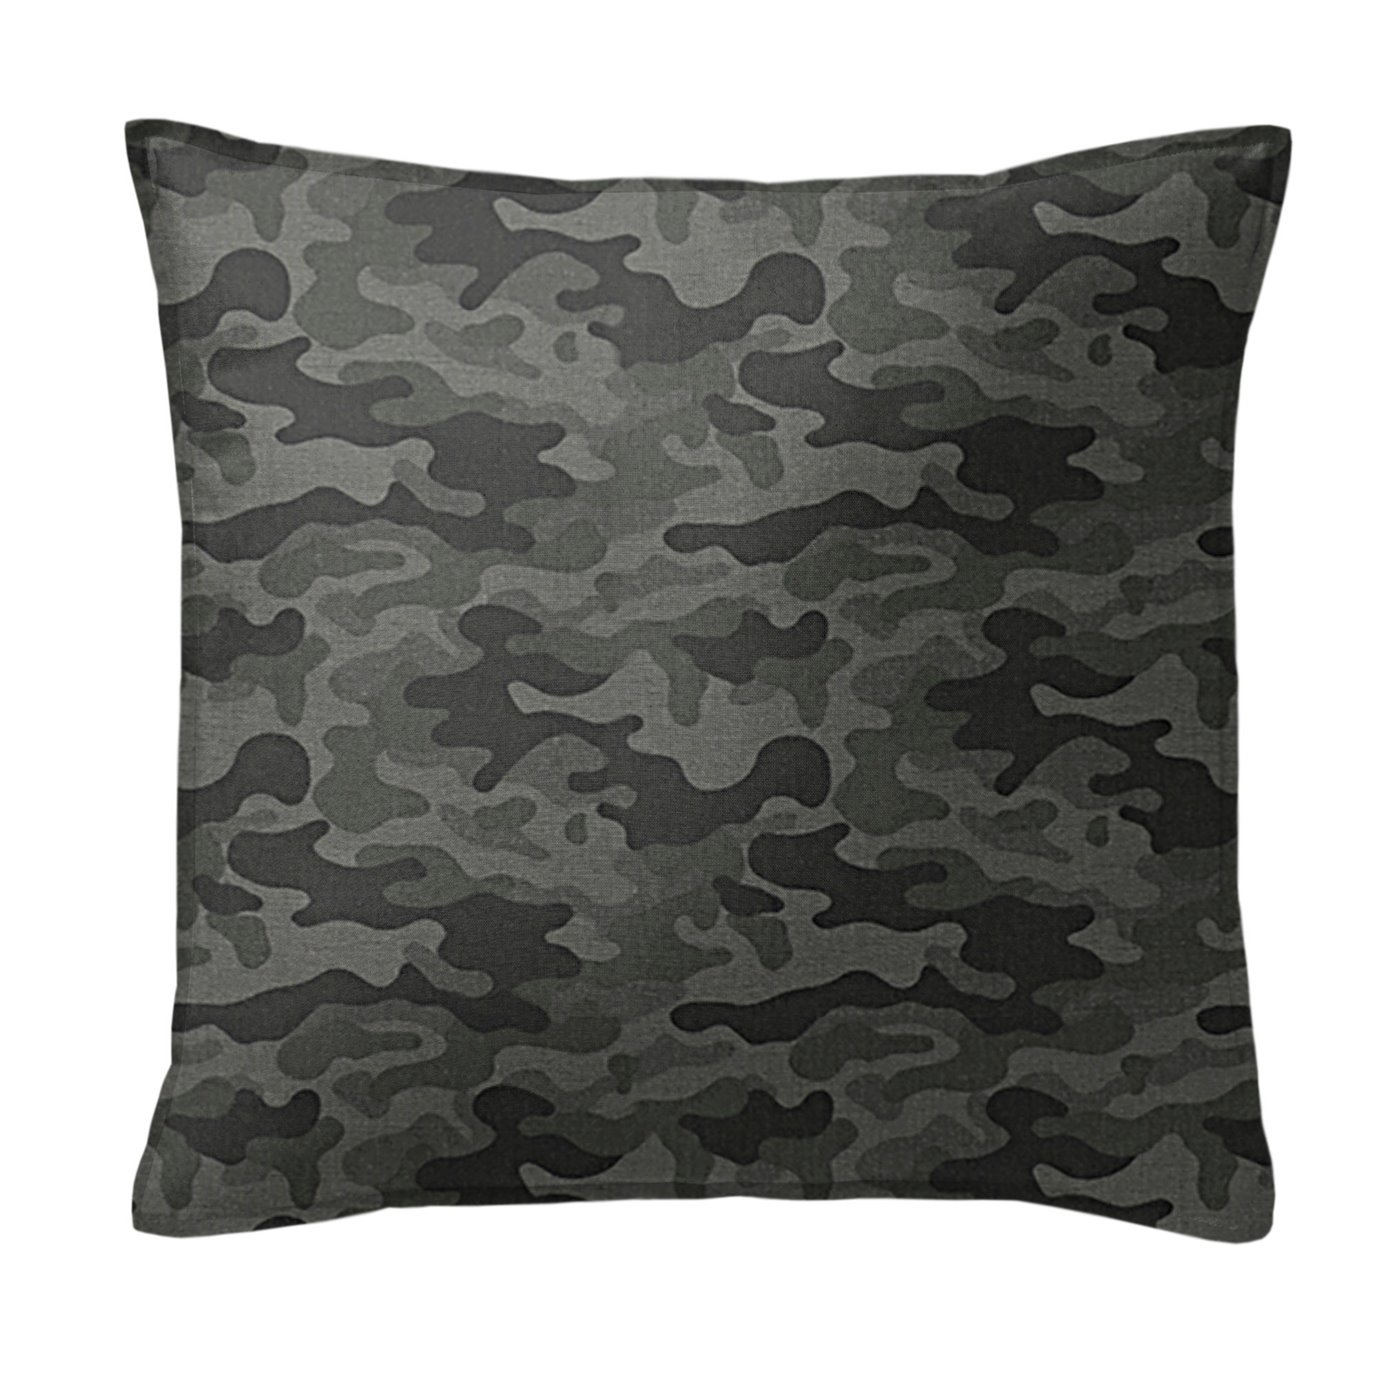 Basic Camo Army Green Decorative Pillow - Size 20" Square